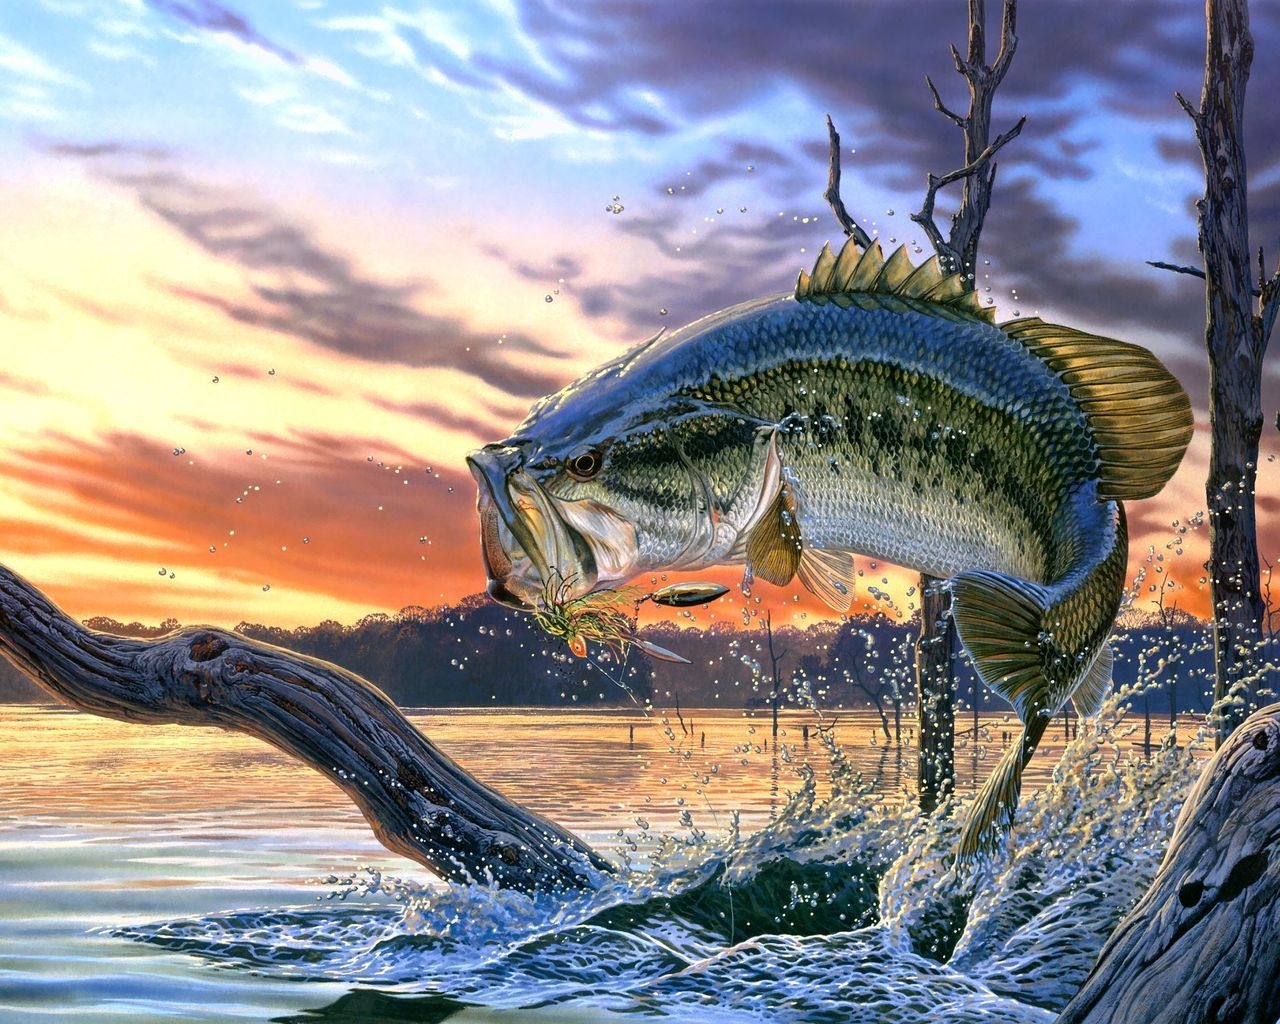 Fantasy Scary Fish for 1280 x 1024 resolution